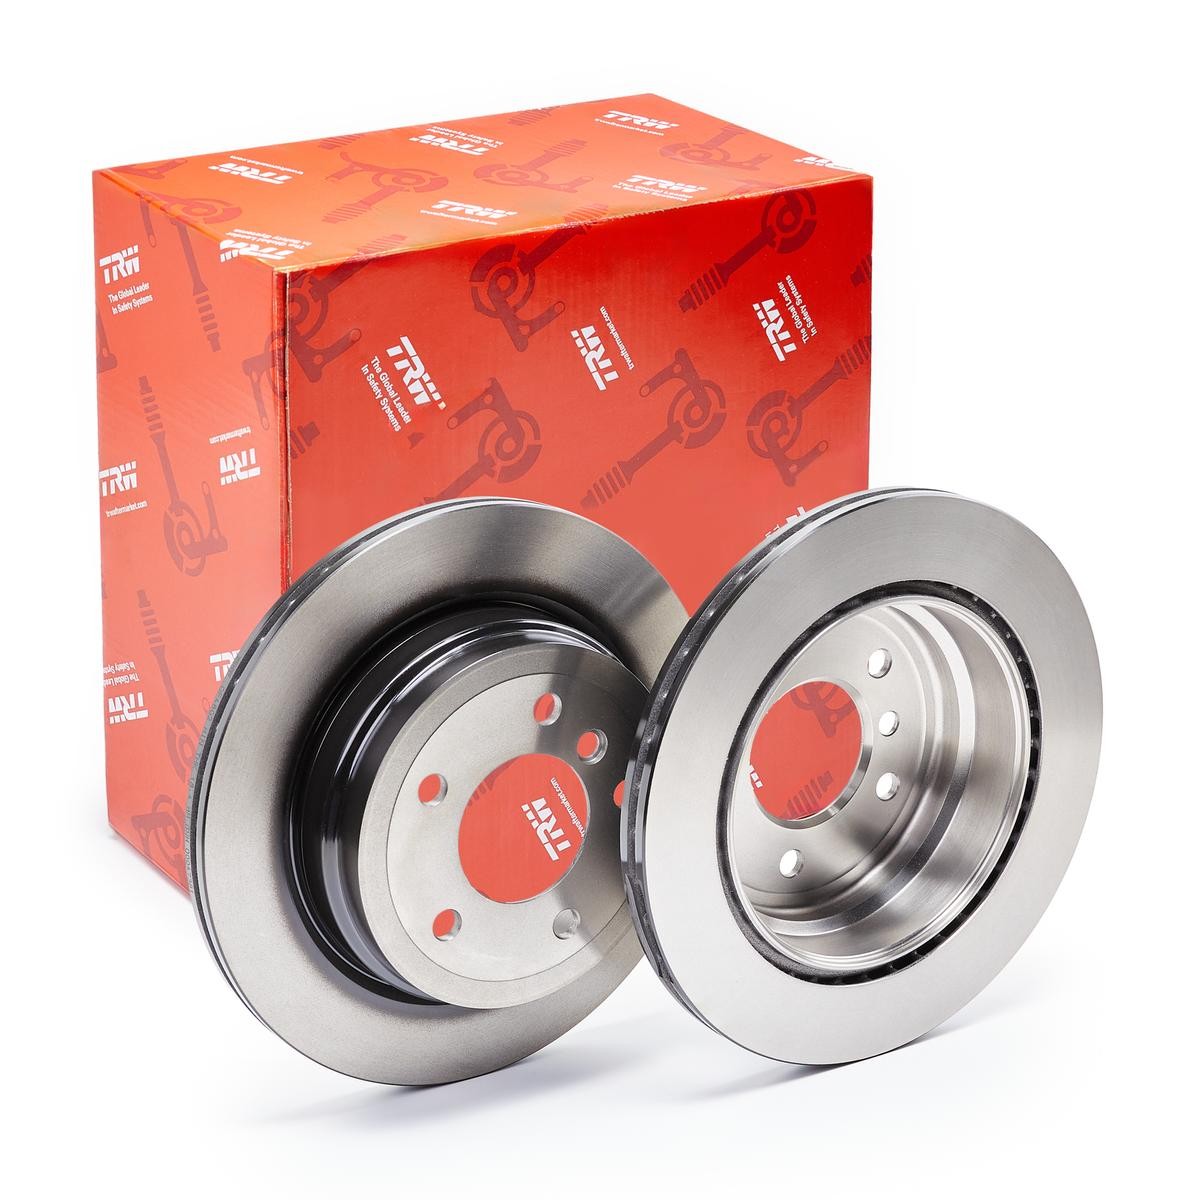 Brake disc DF4802 from TRW